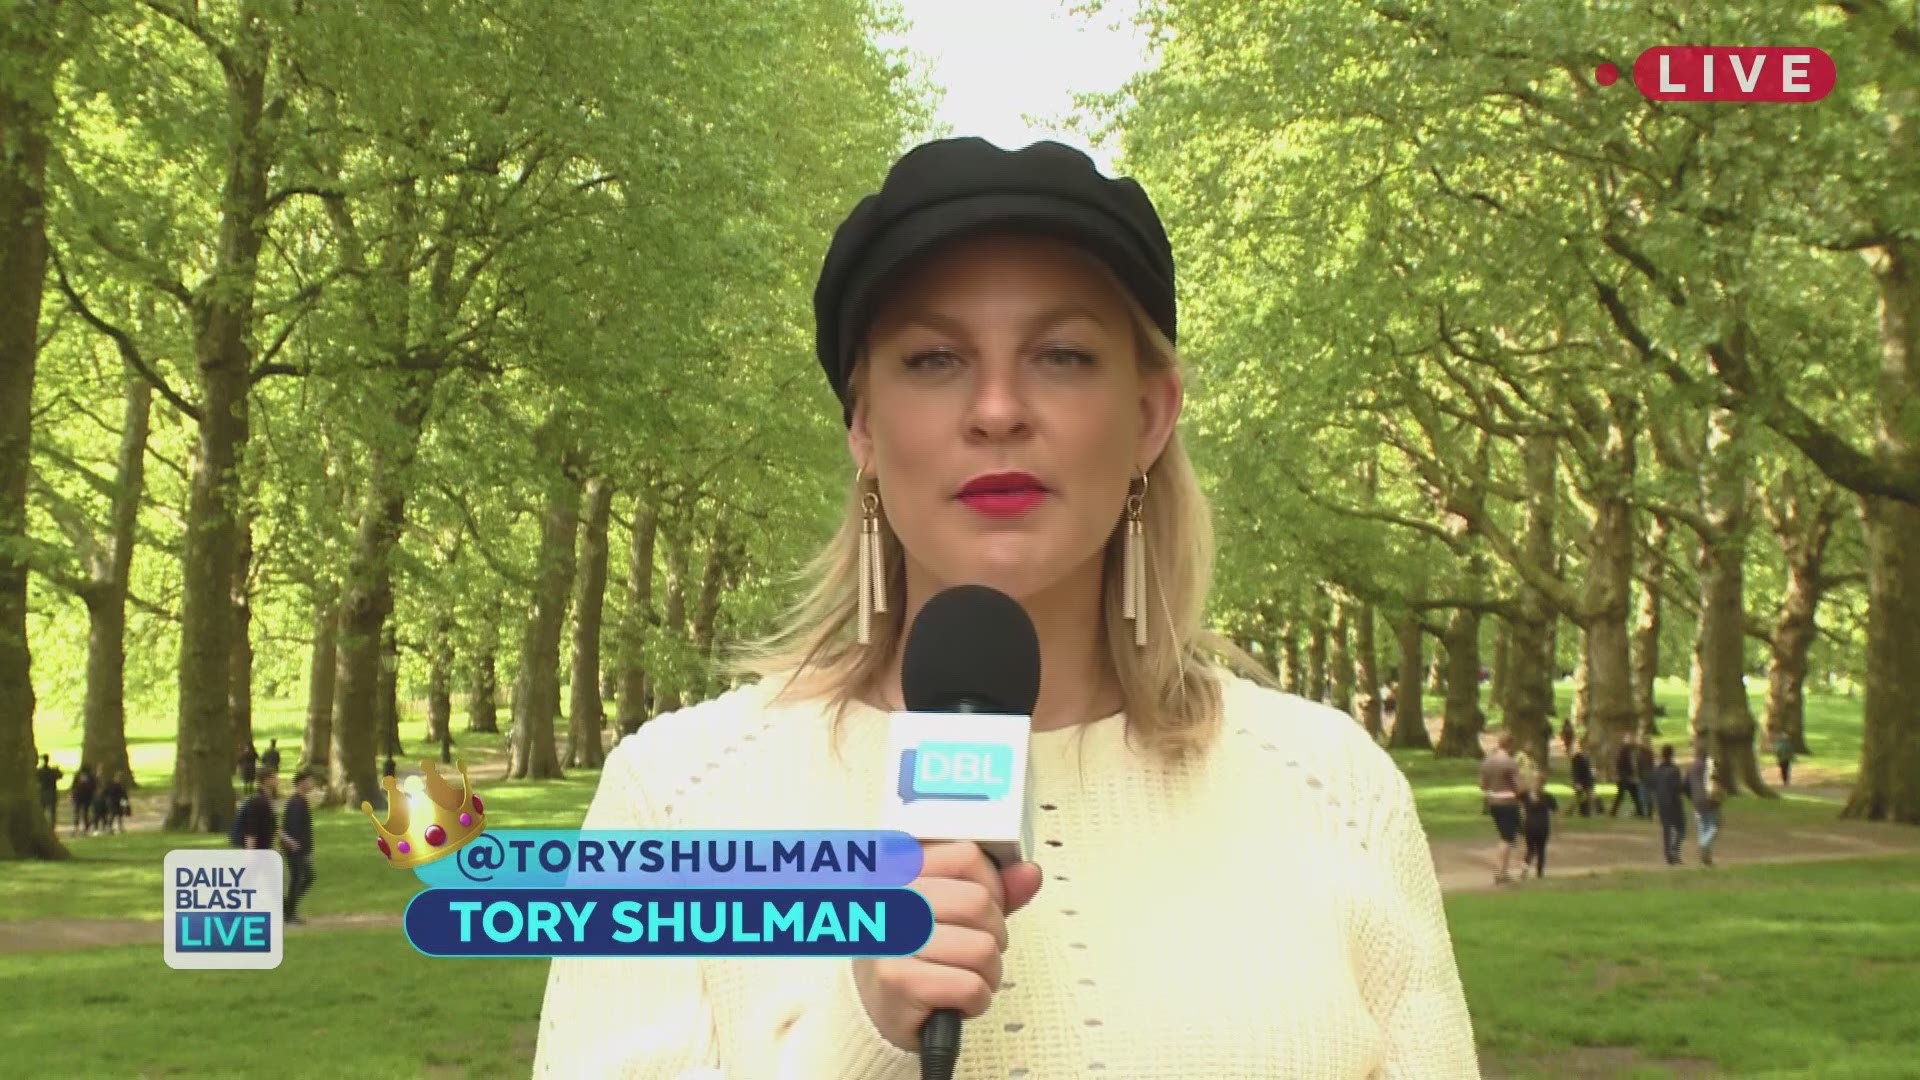 Daily Blast LIVE co-host Tory Shulman is loose in London and tracking all the royal wedding details. Today, Tory takes a double decker bus around the city learning the history of royal weddings, how the natives watch the wedding, and what the Brits really